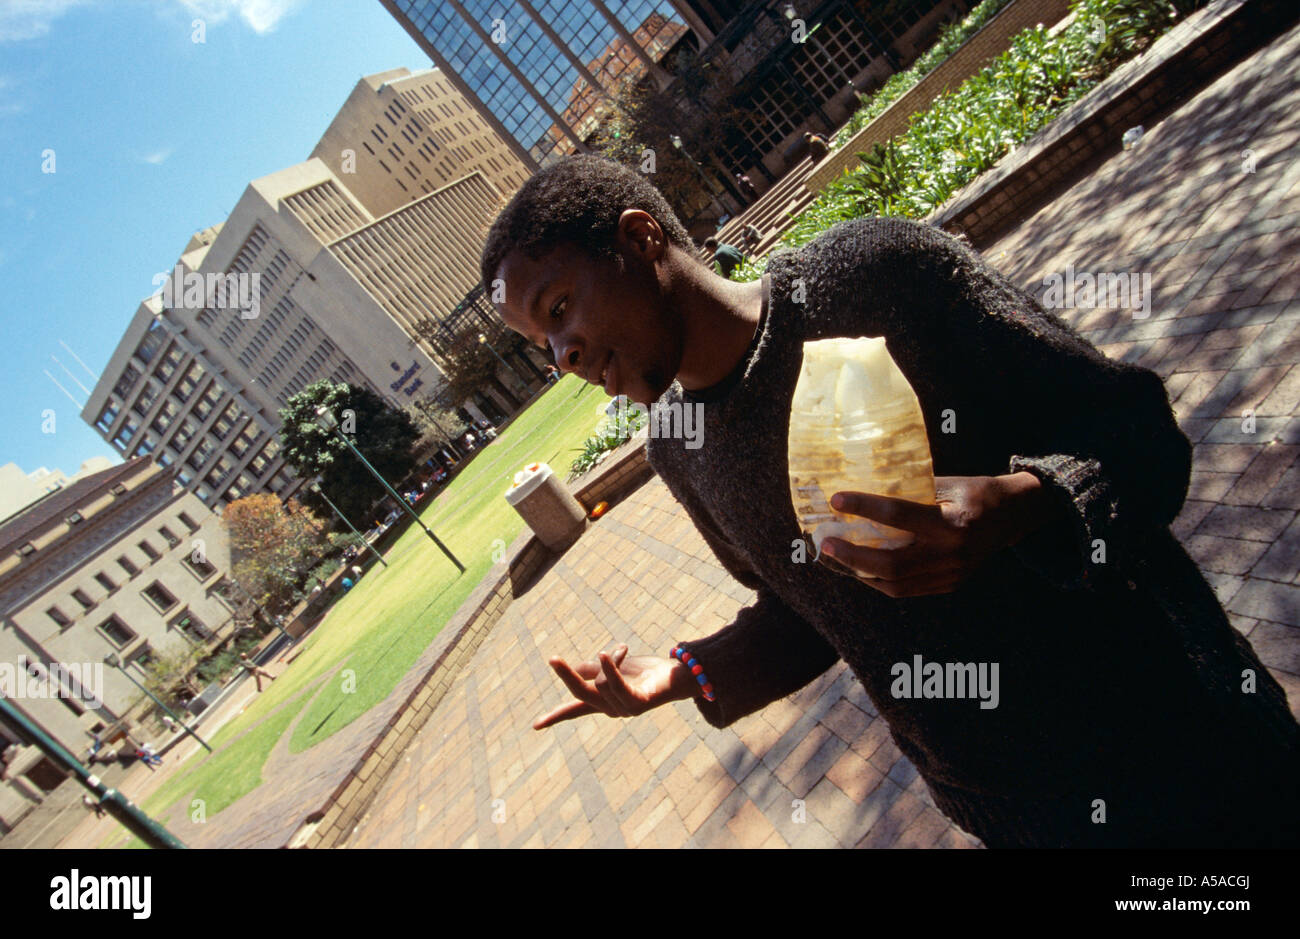 Young homeless boy sniffing glue on streets, Johannesburg, South Africa Stock Photo